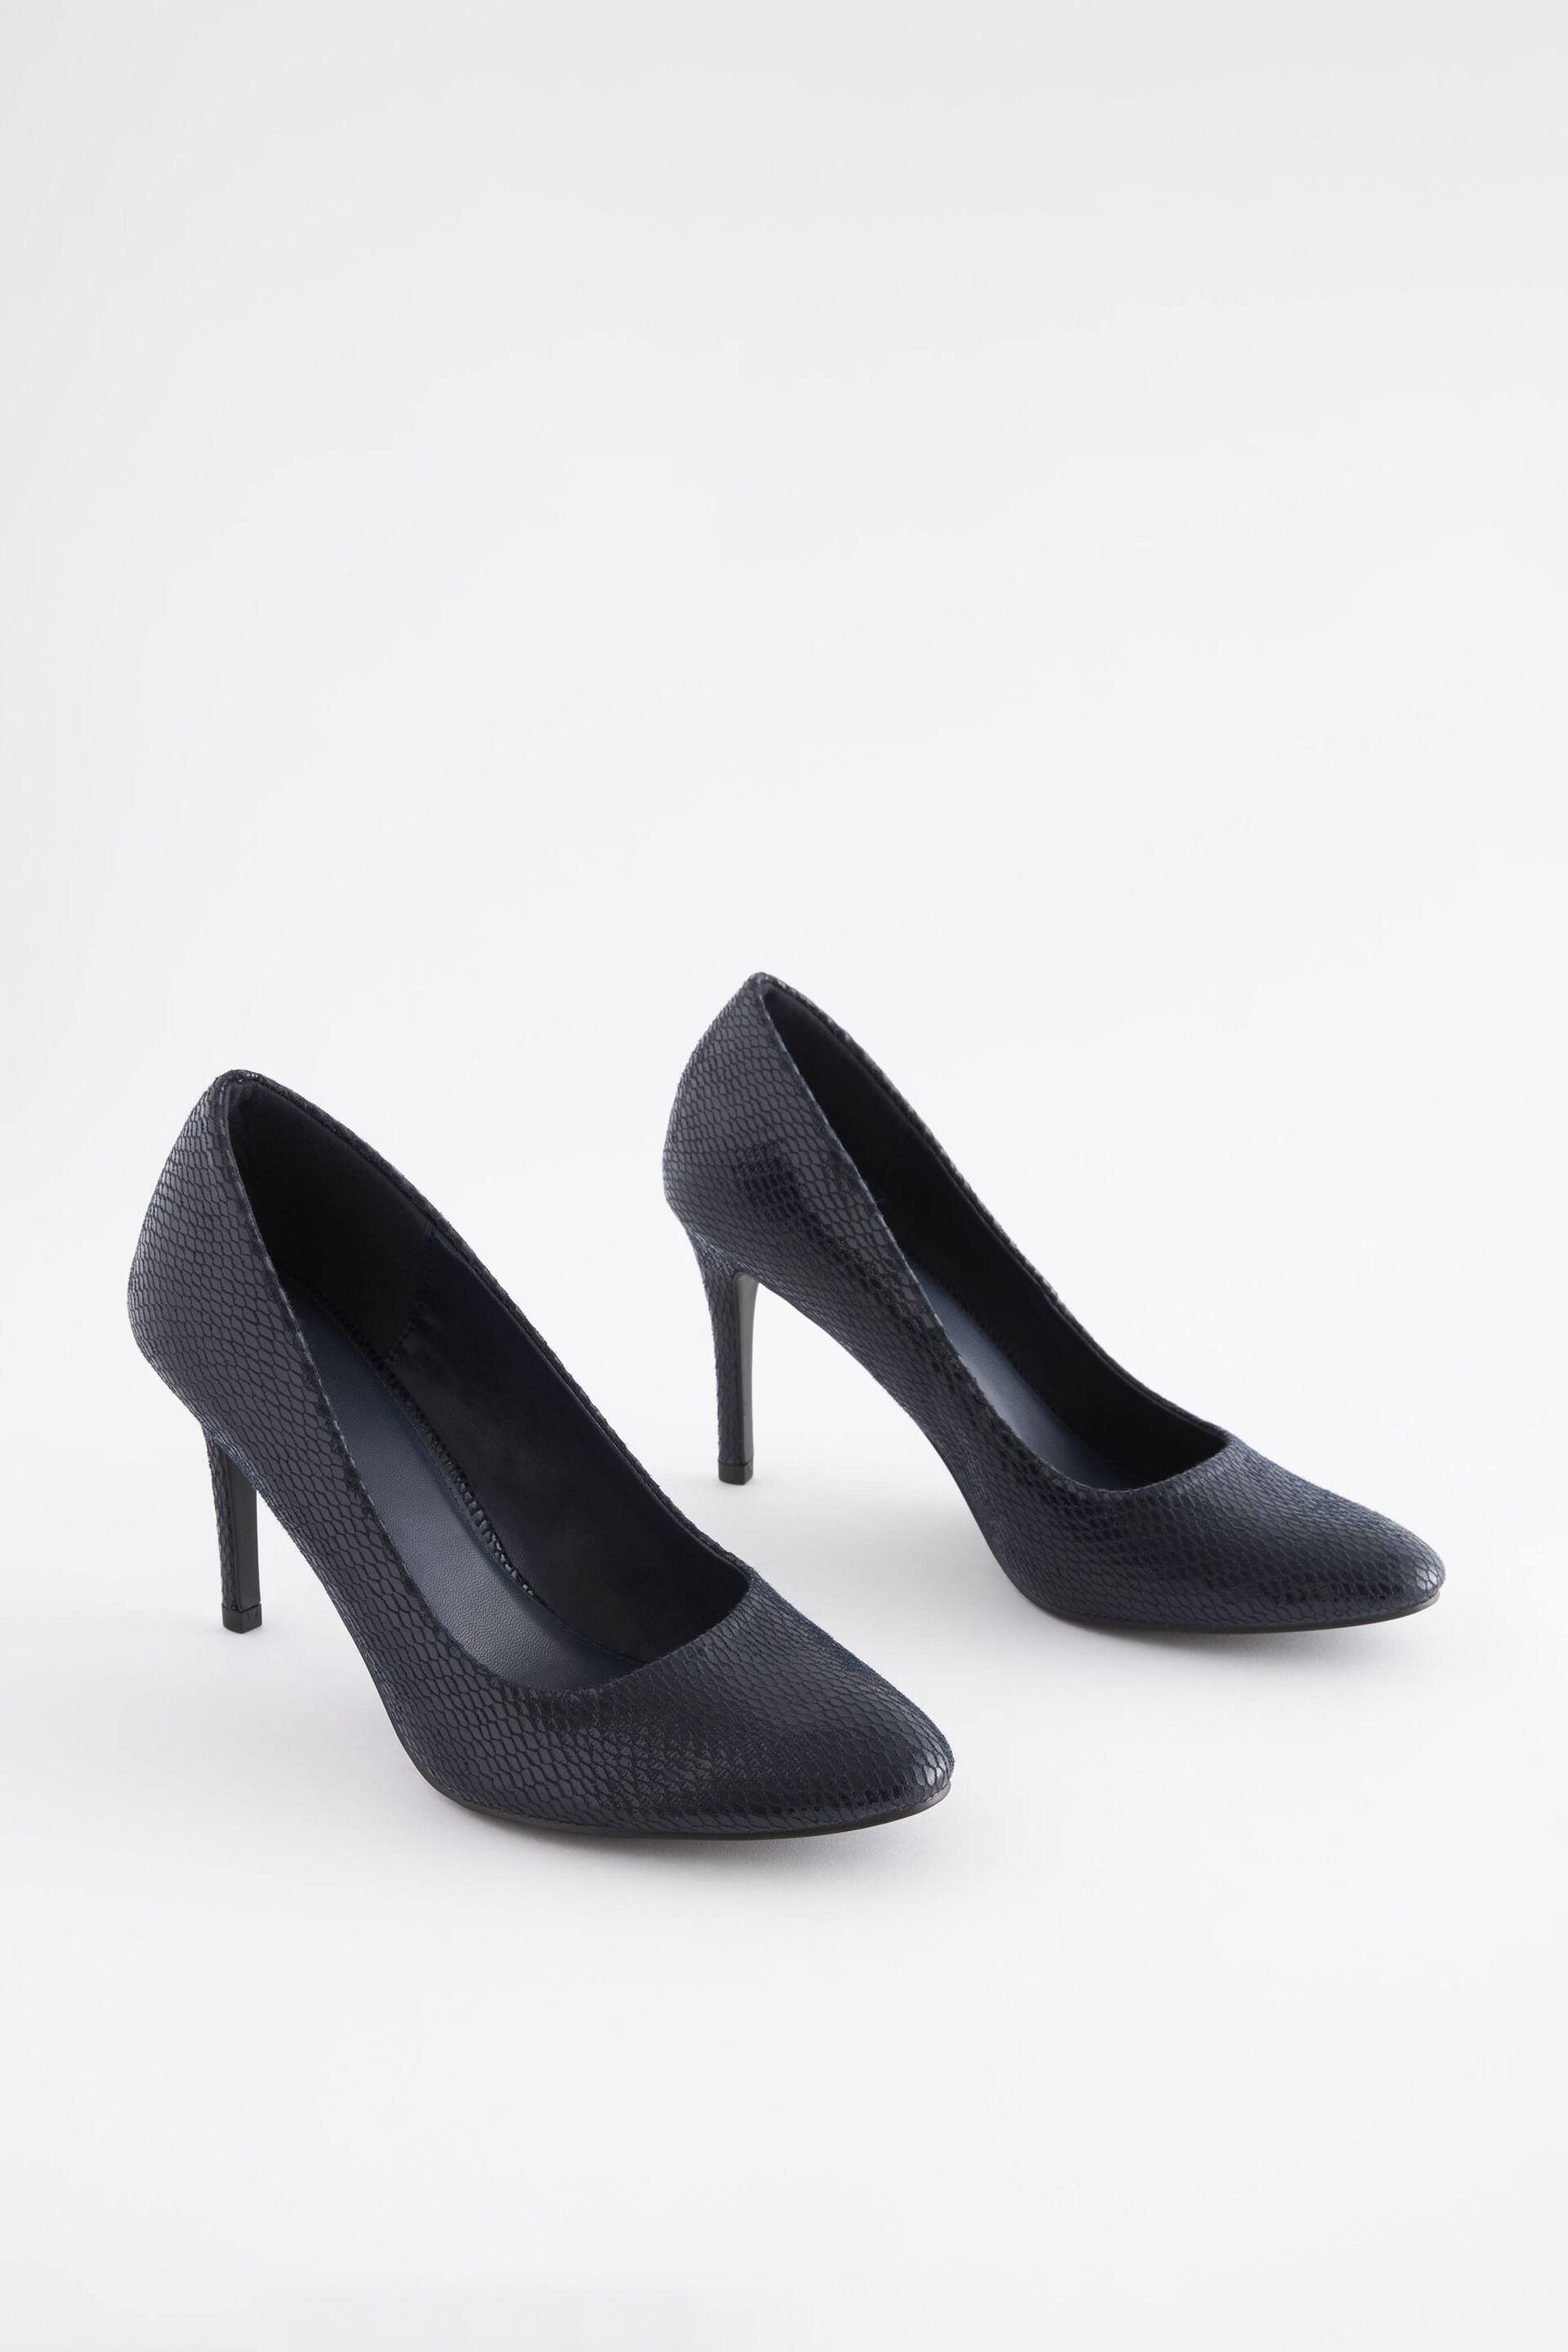 Navy Blue Extra Wide Fit Forever Comfort® Round Toe Court Shoes - Image 3 of 7